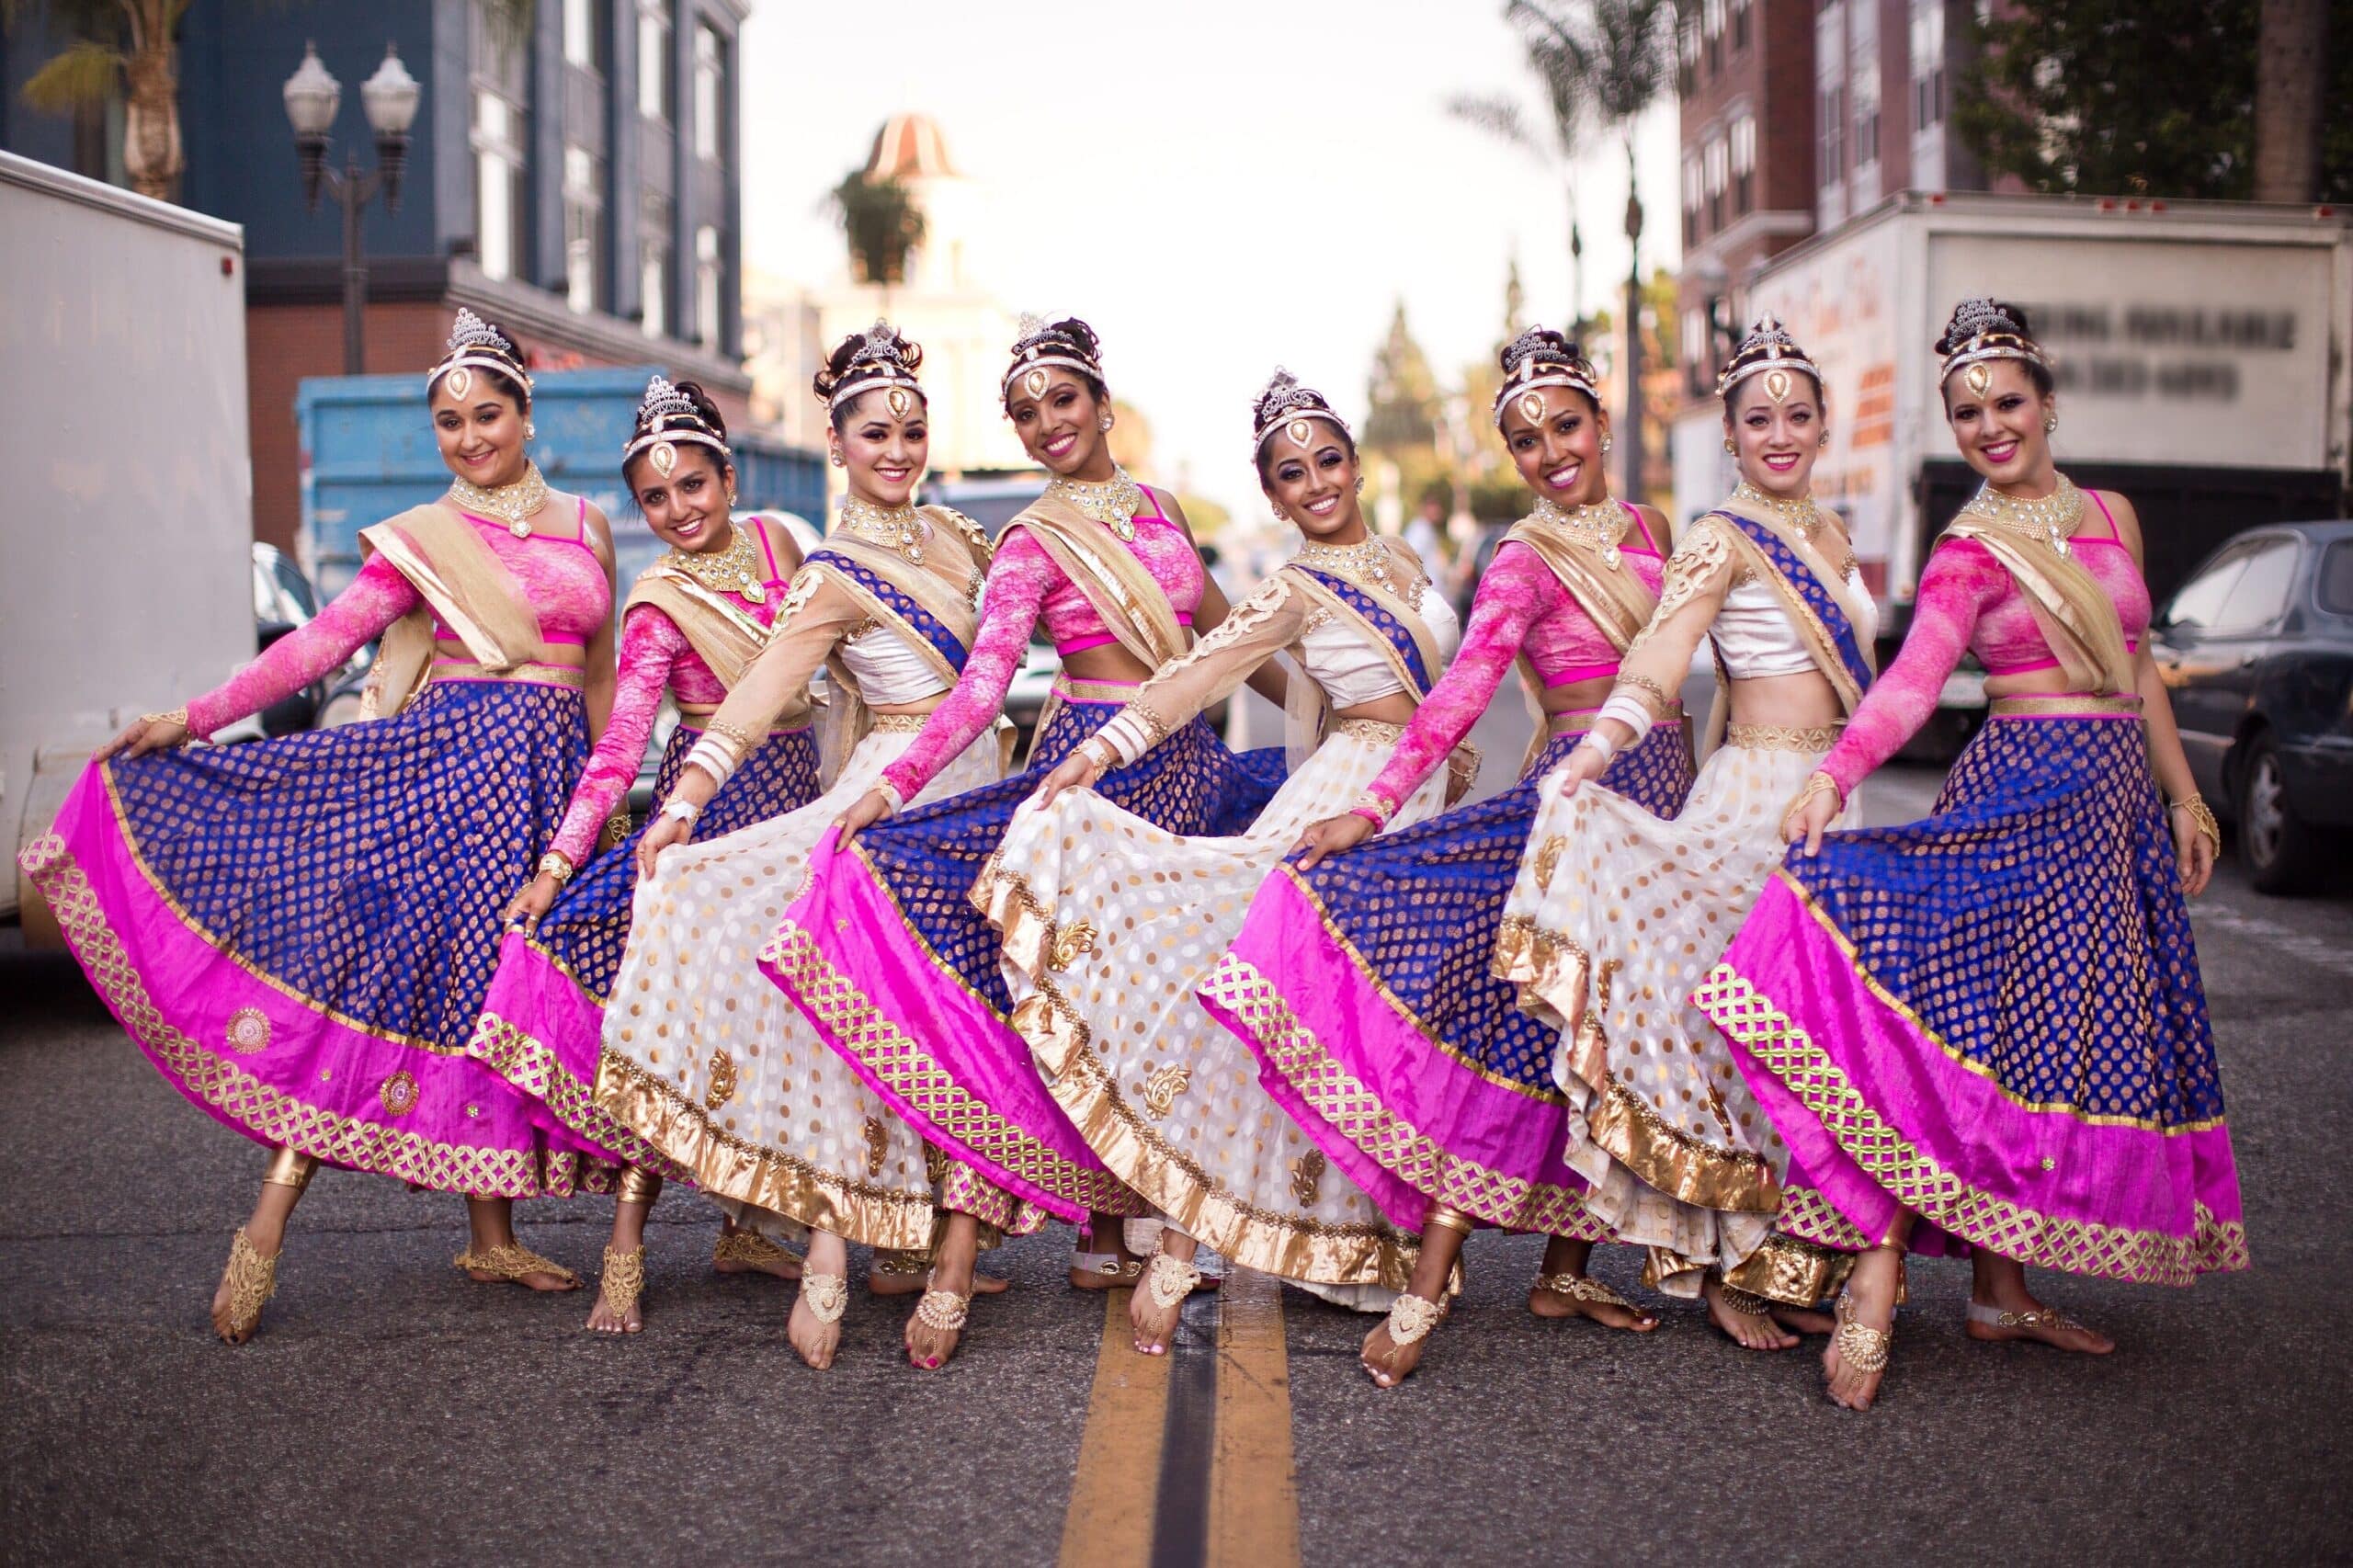 8 members of Rhythm India standing in street holding purple and pink skirts out.